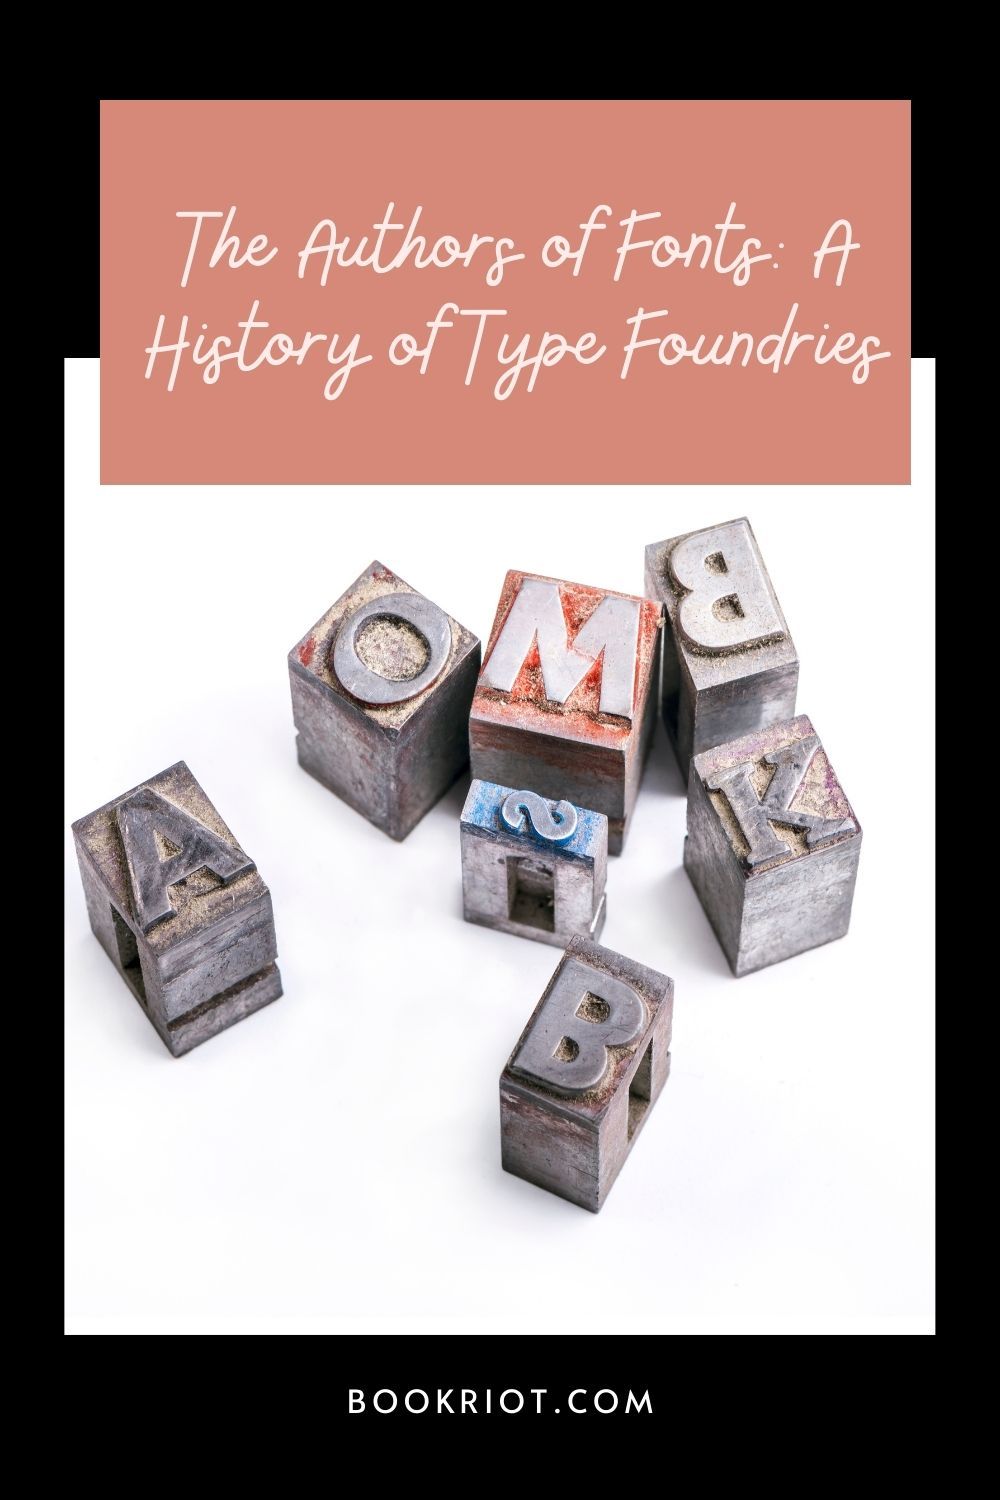 The Authors of Fonts A History of Type Foundries Book Riot